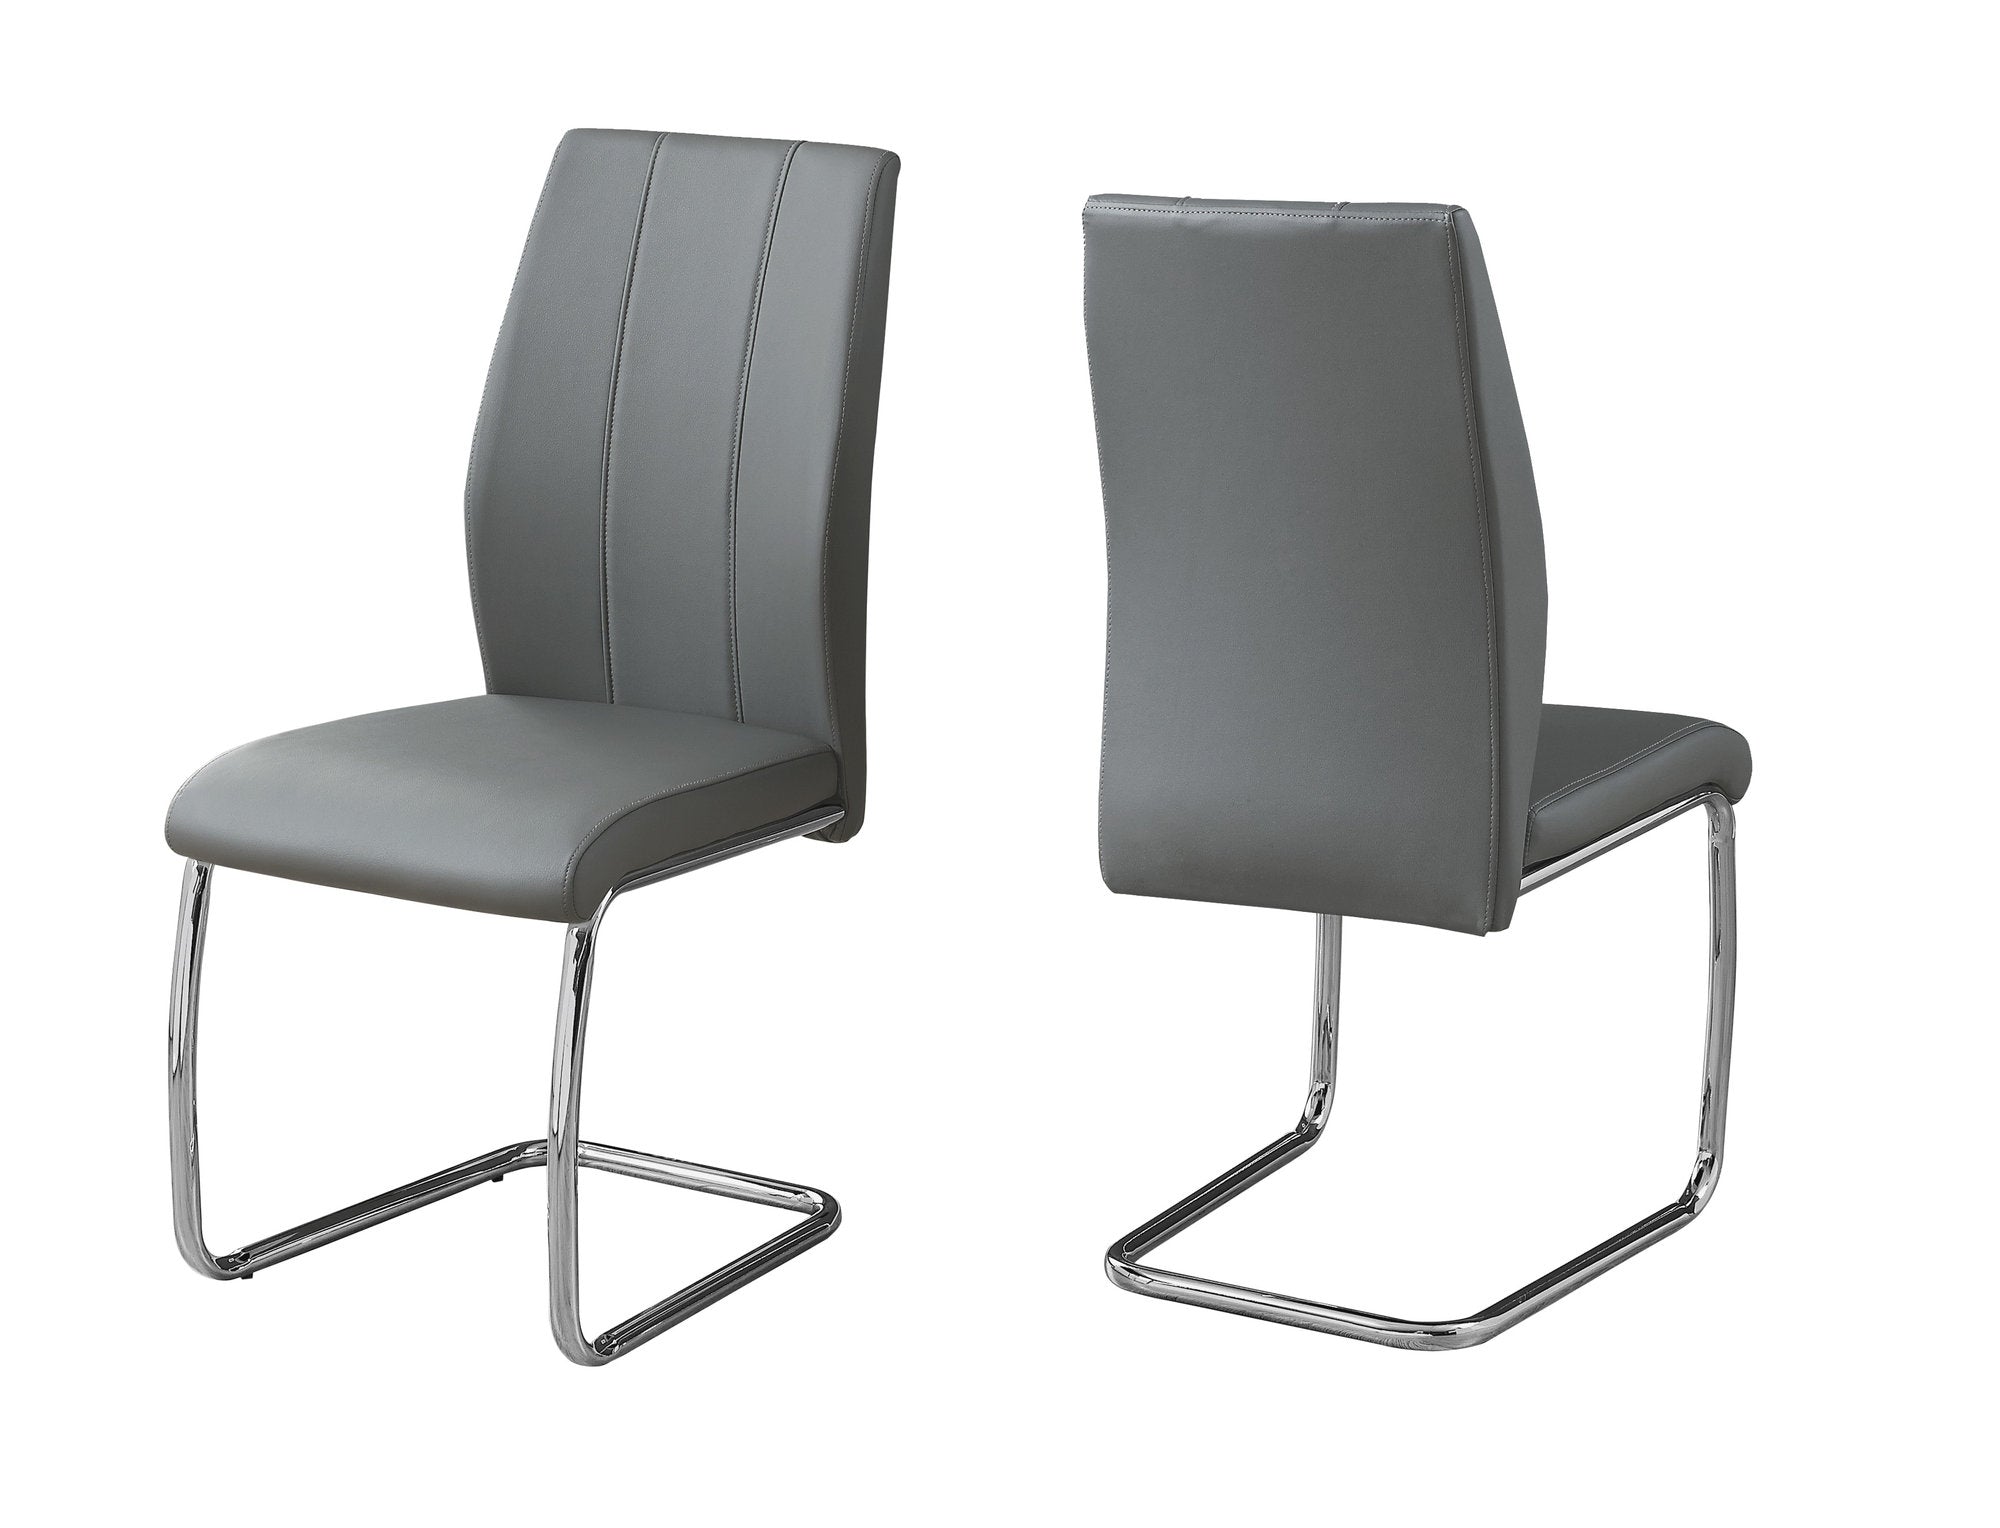 Dining Chair - 2Pcs / 39H / Grey Leather-Look / Chrome